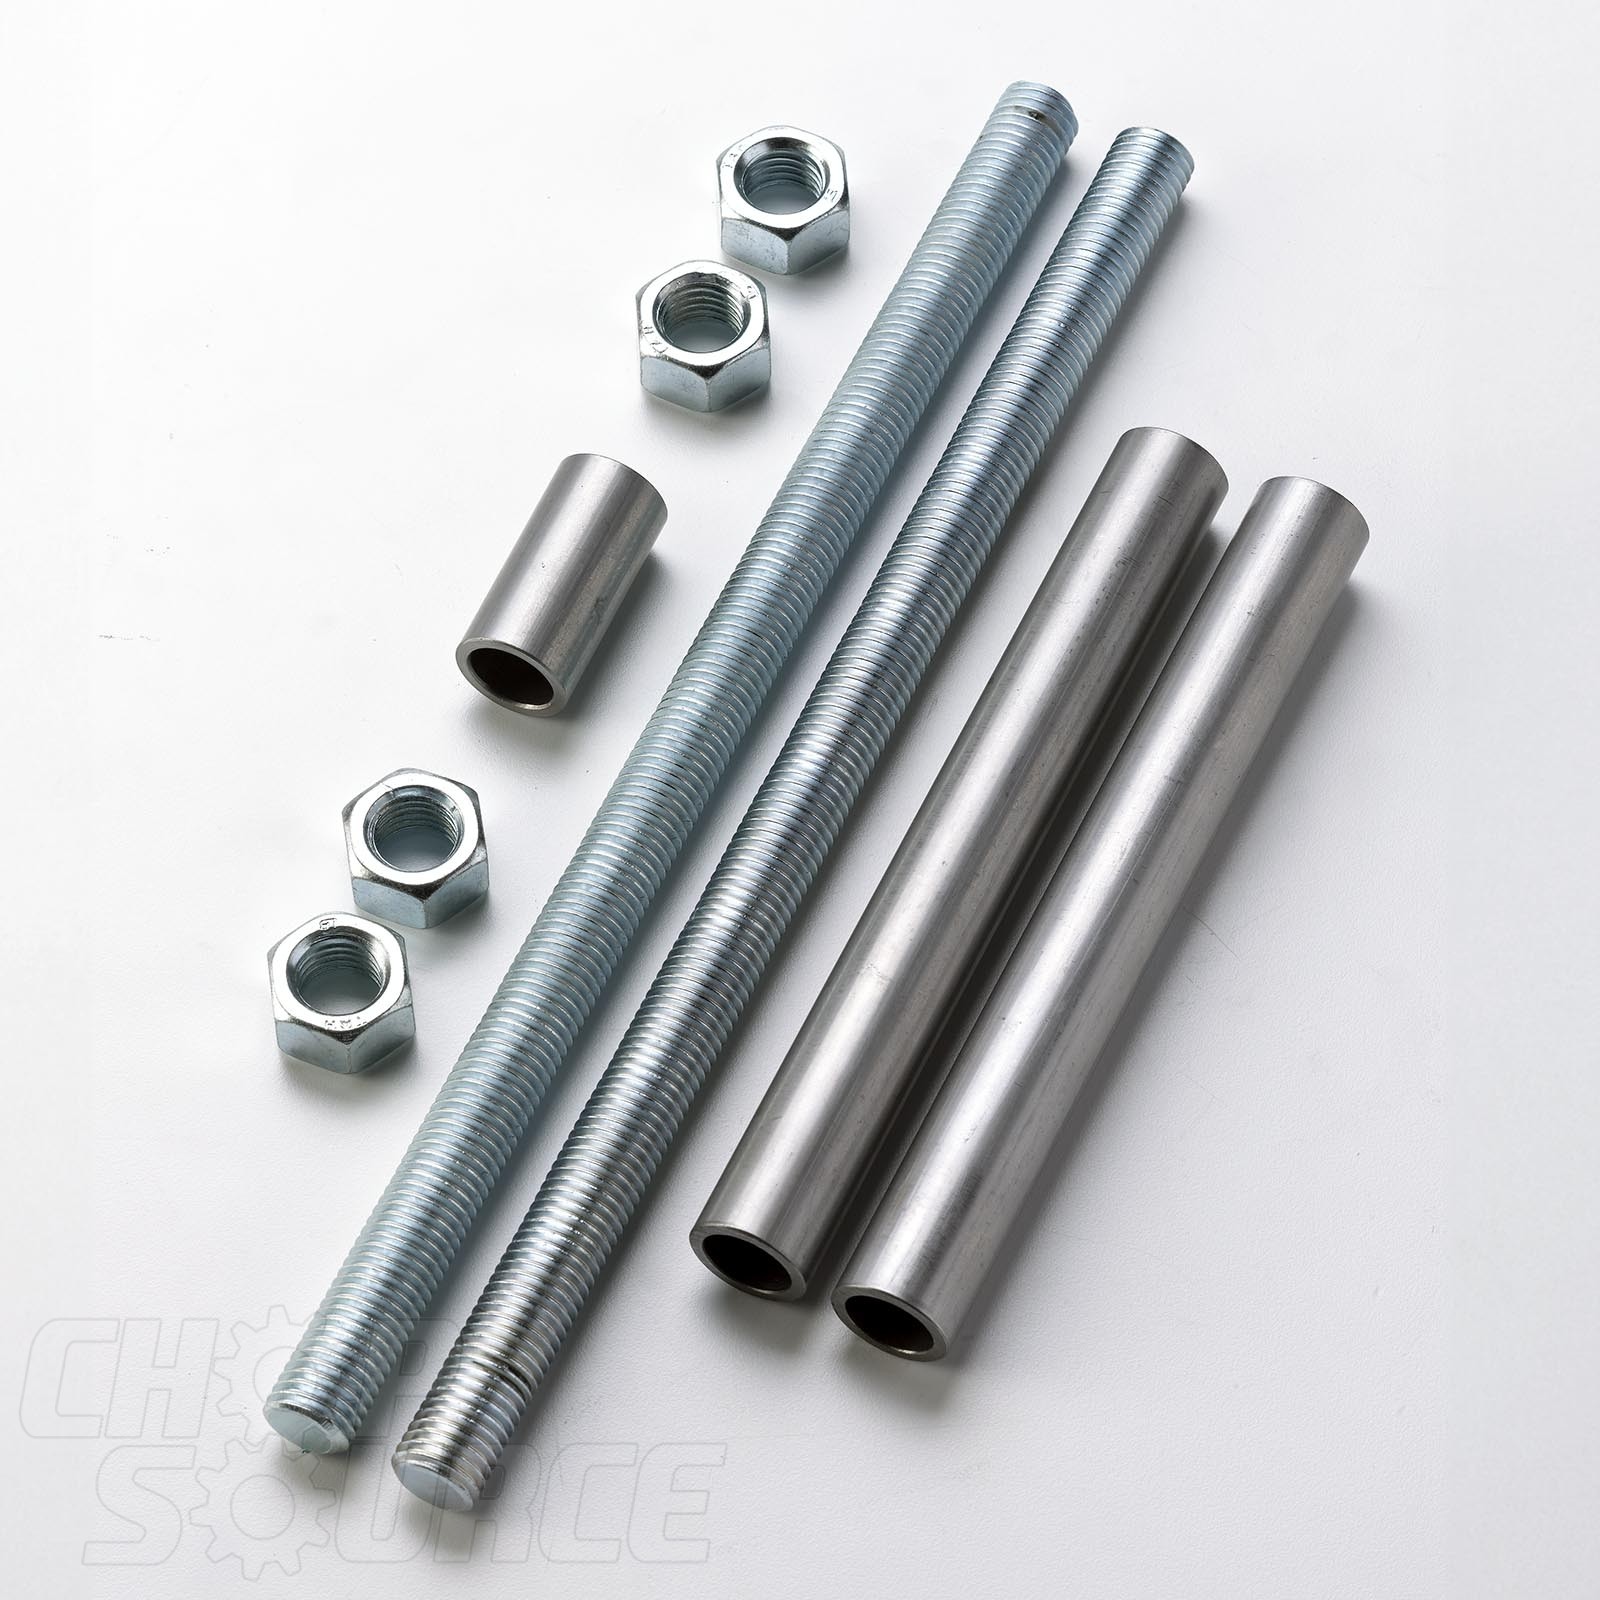 3/4" Threaded Rods with Spacer Material for Axle Plate Fixture